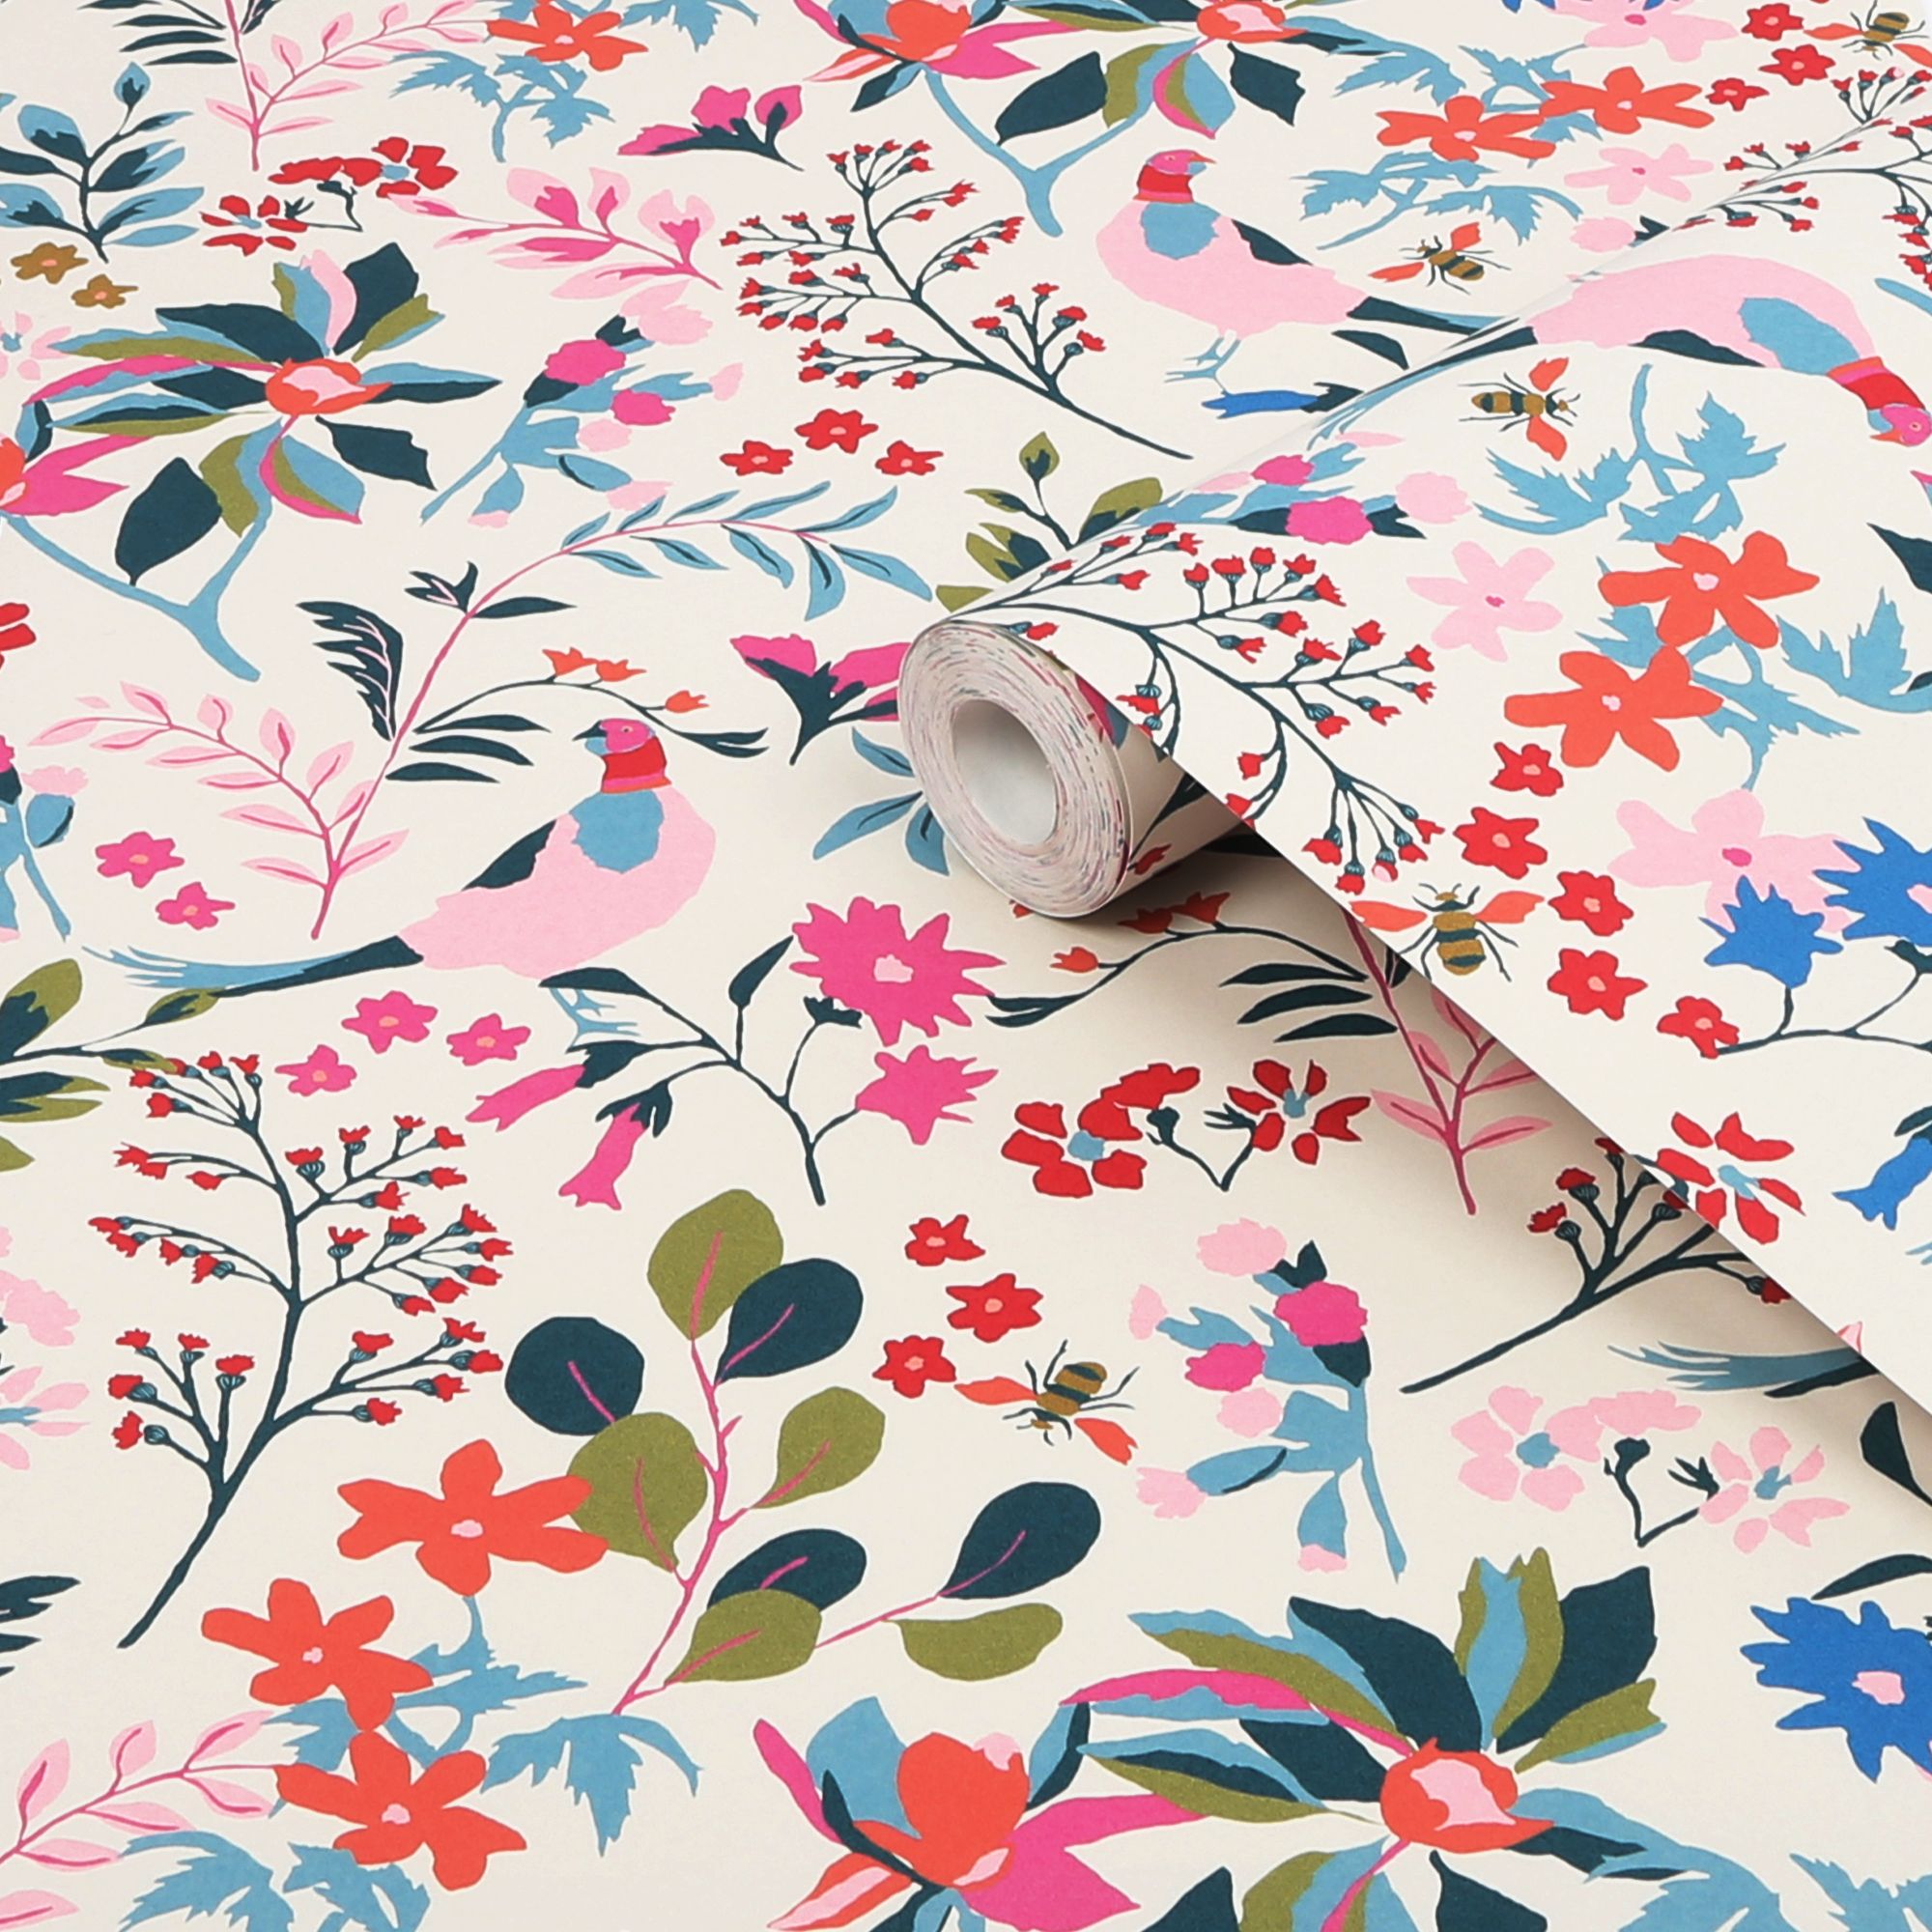 Joules Multicolour Bird & floral Smooth Wallpaper